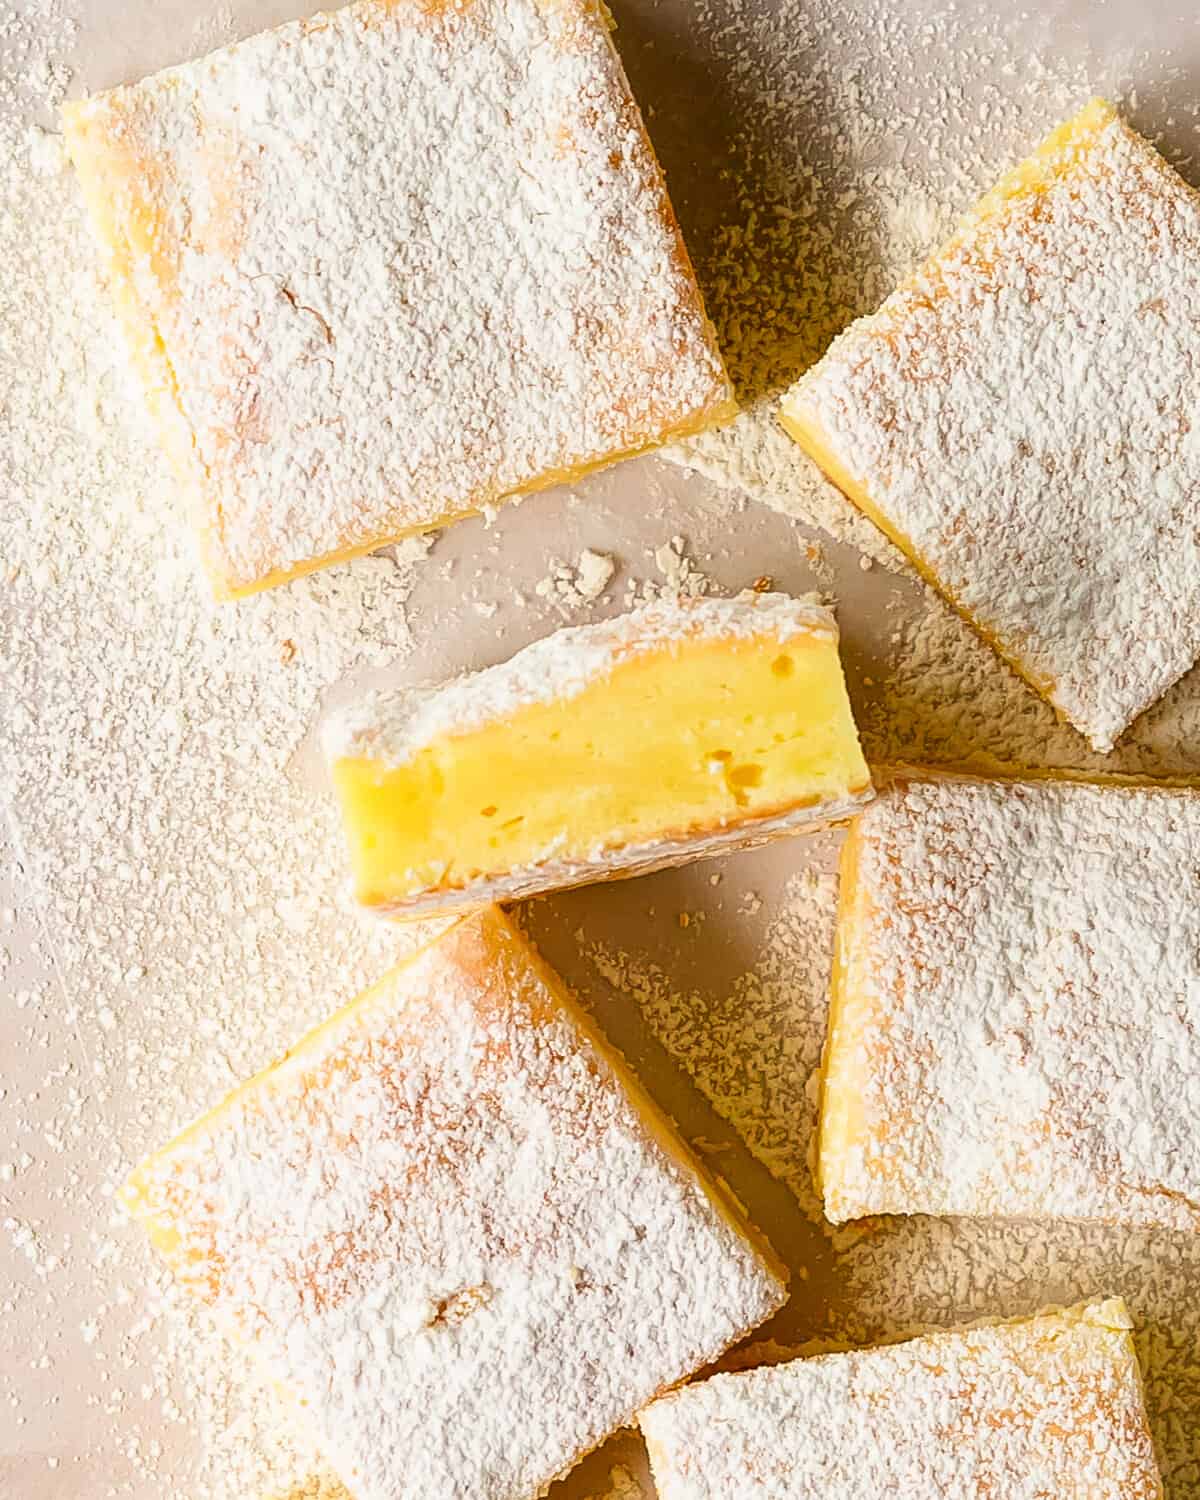 2 ingredient lemon bars are an impossibly quick and easy to make lemon dessert made from light and airy angel food cake mix and tart lemon pie filling. Top these lemon bars from cake mix with a dusting of sweet powdered sugar for a wonderfully refreshing dessert that’s made for spring and summer entertaining. 